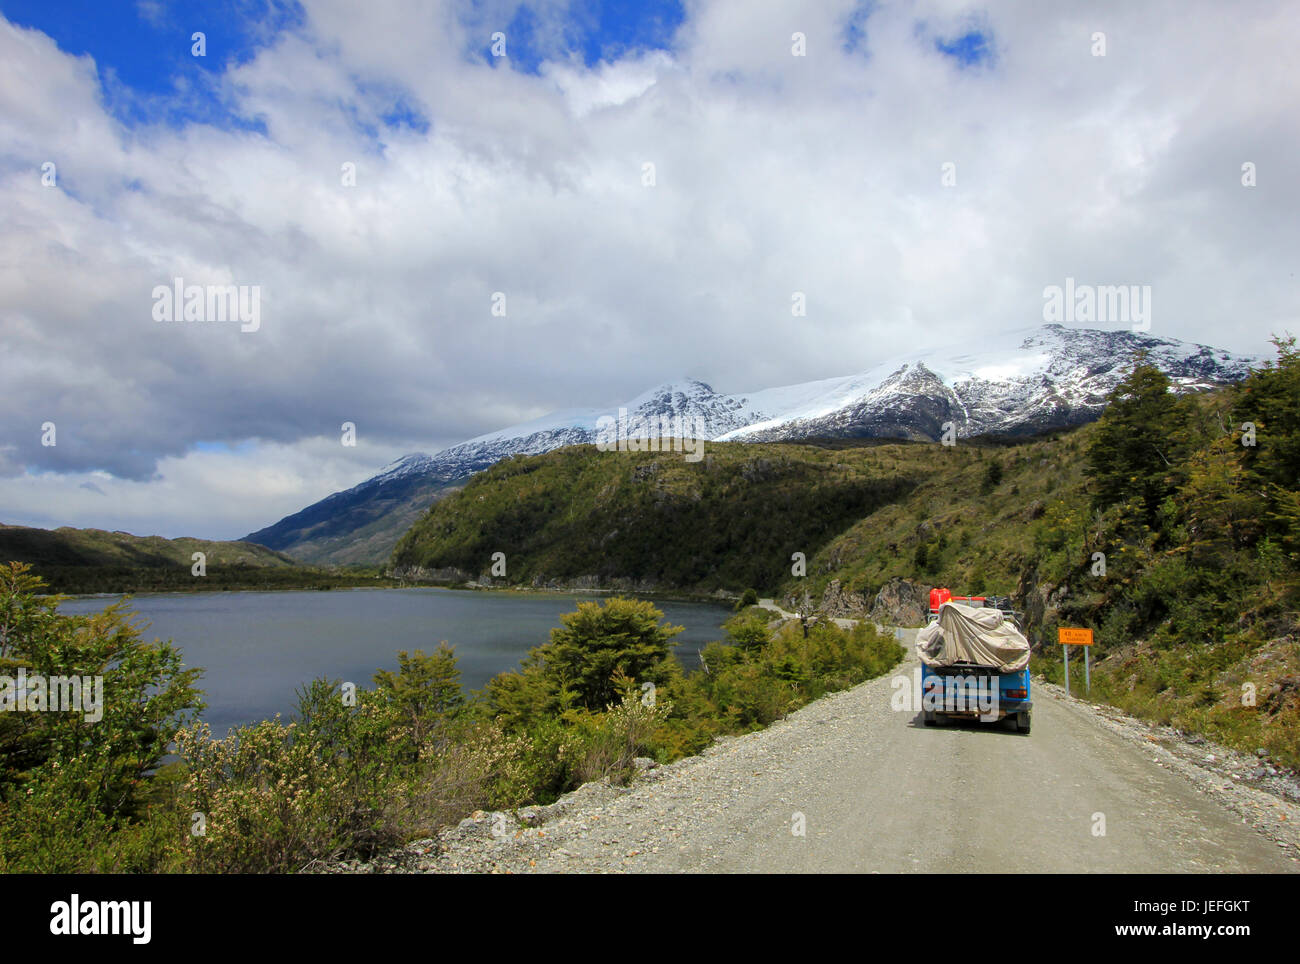 Van driving on Carretera Austral, on the way to Villa O'Higgins, Patagonia, Chile Stock Photo